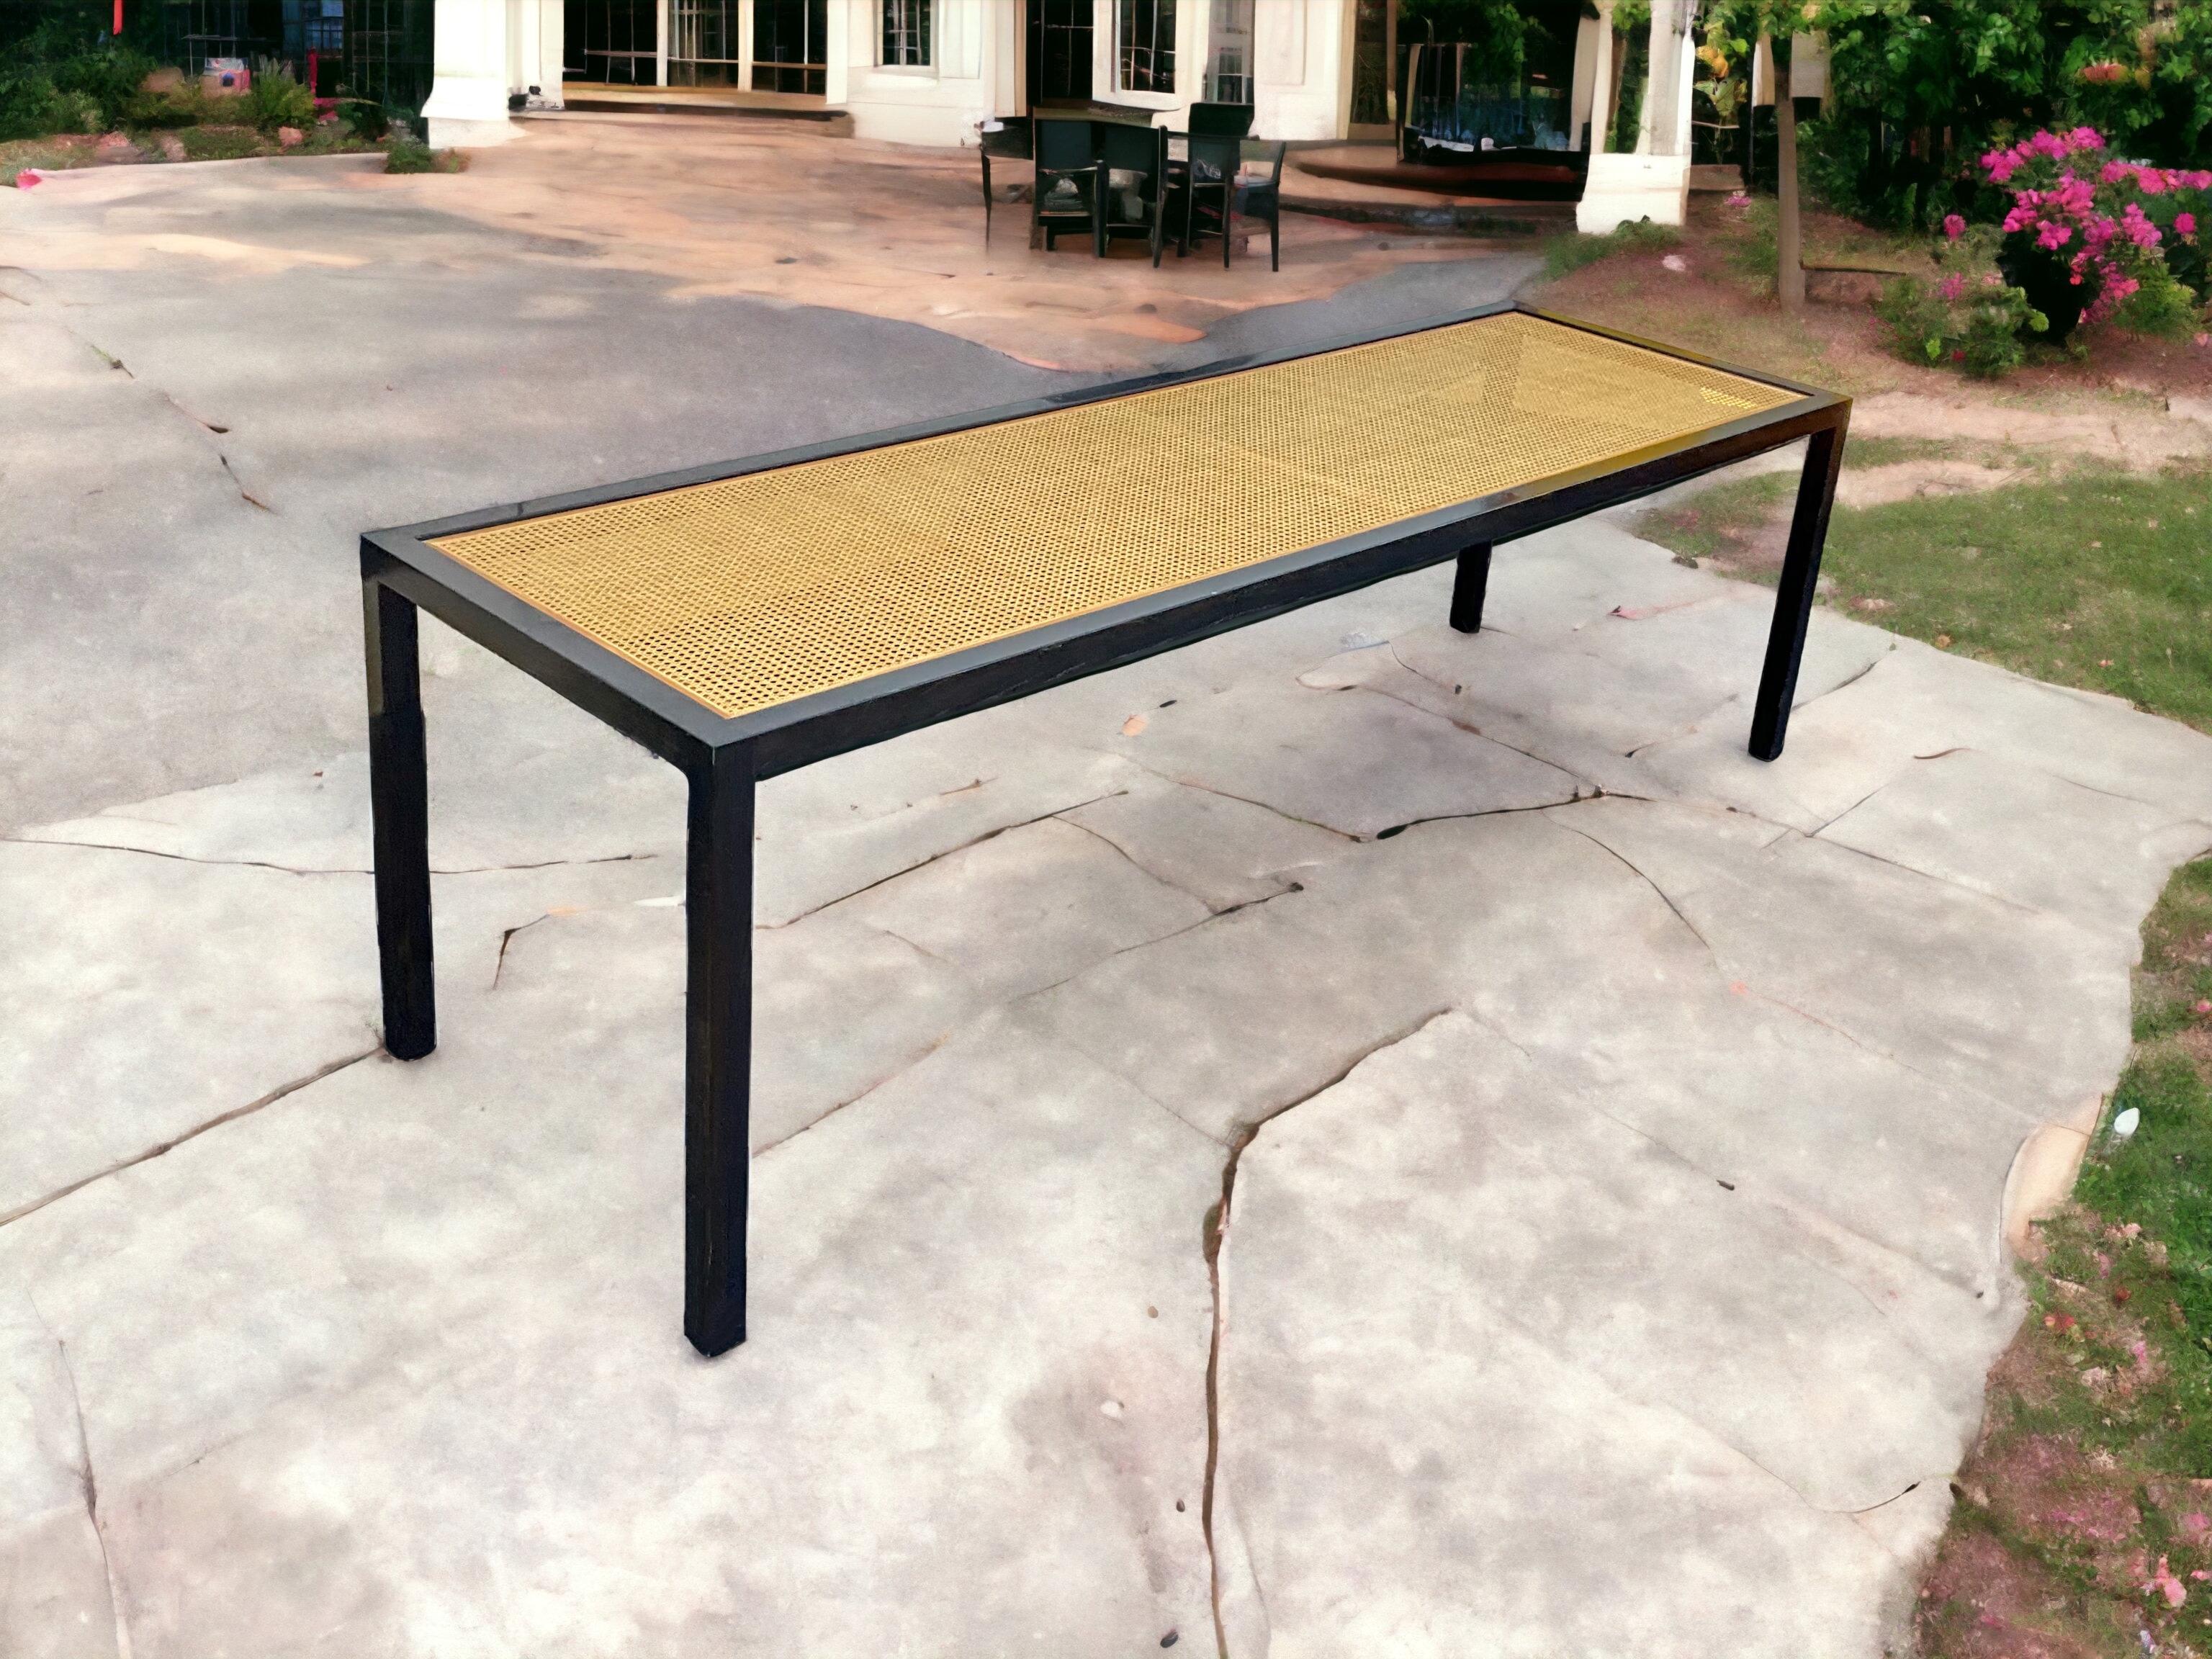 This is such an interesting table. It is in the manner of Danny Ho Fong with its cane top and slender Parsons’ style form. The ebonized frame is in very good condition. The glass top was removed for photography. It could work as a dining table or